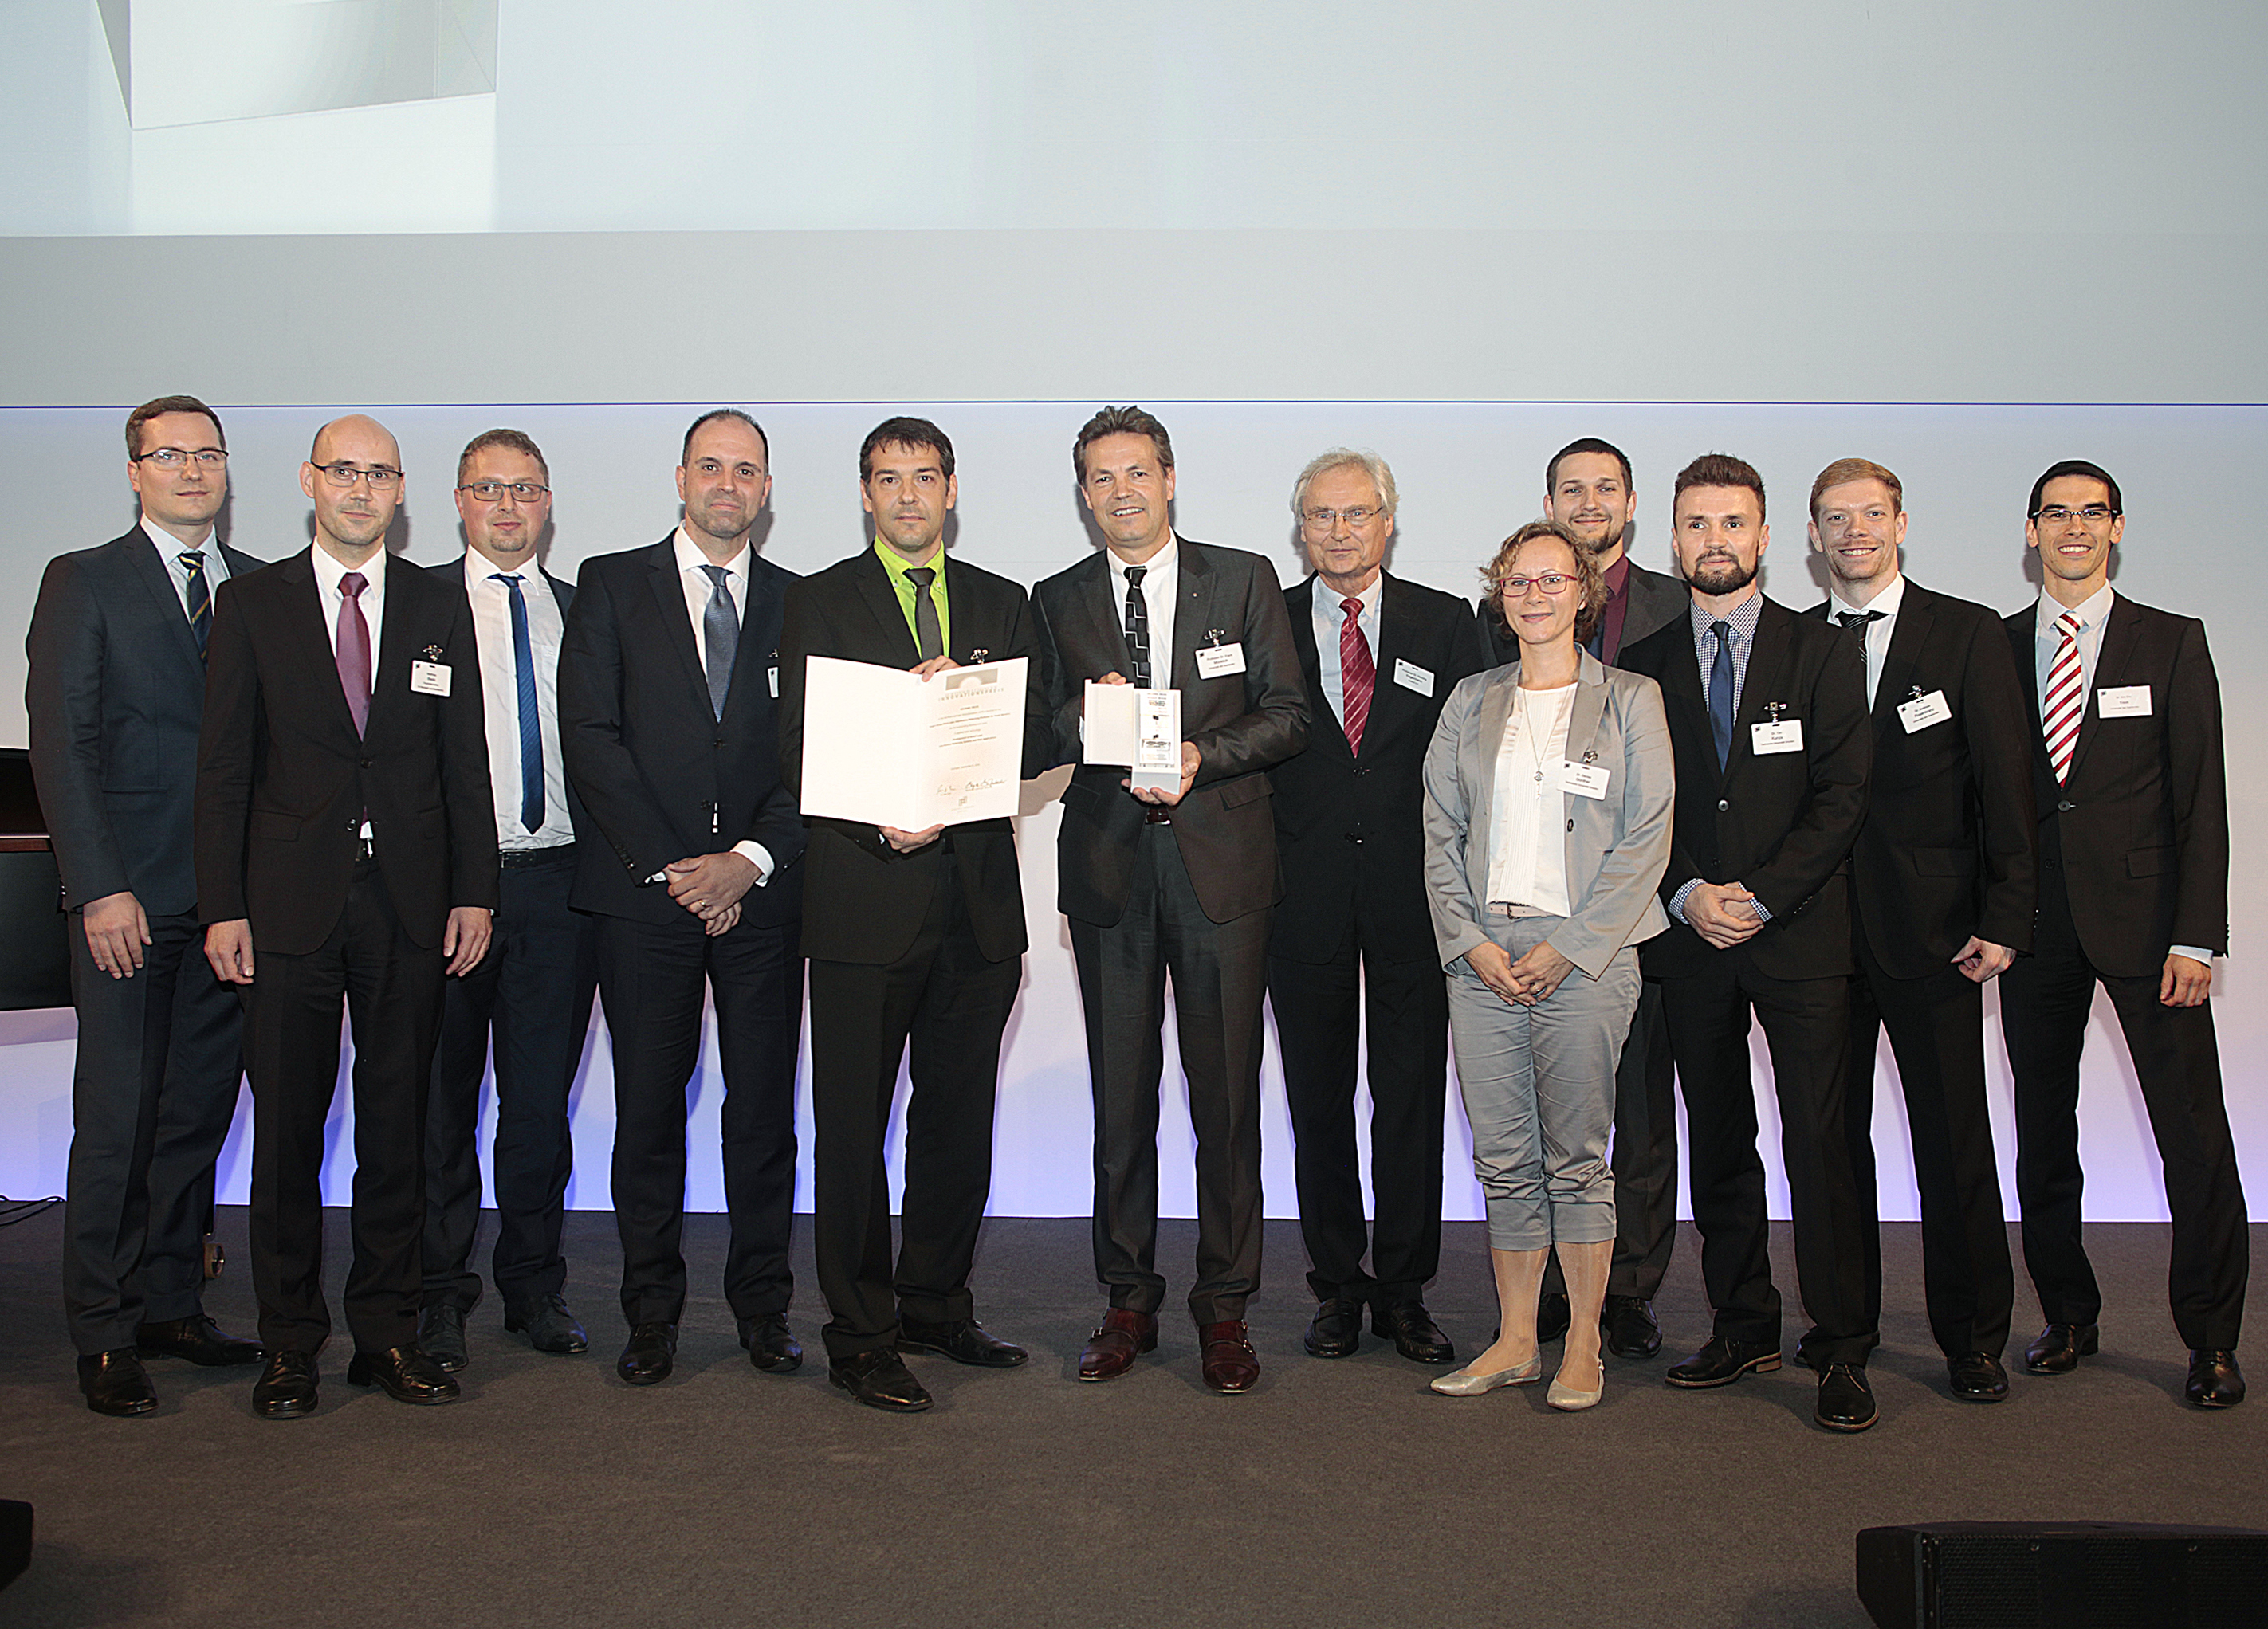 The nineth award ceremony with the presentations of the Berthold Leibinger Innovationspreis 2016 took place on the evening of September 9, 2016.